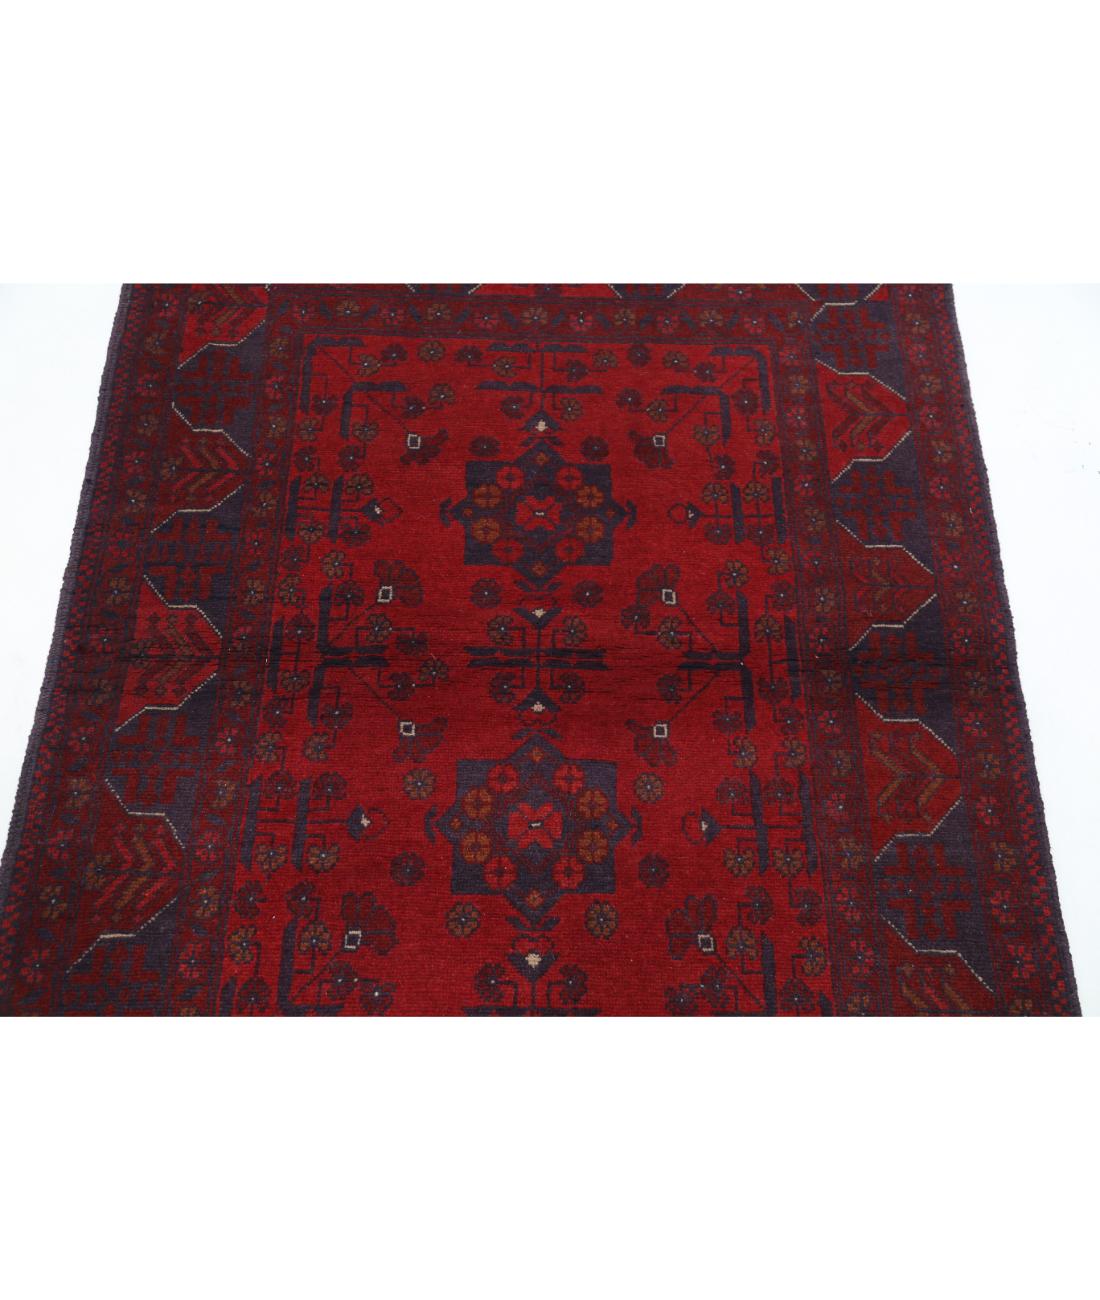 Hand Knotted Afghan Khal Muhammadi Wool Rug - 3'4'' x 4'9'' 3' 4" X 4' 9" (102 X 145) / Red / Blue